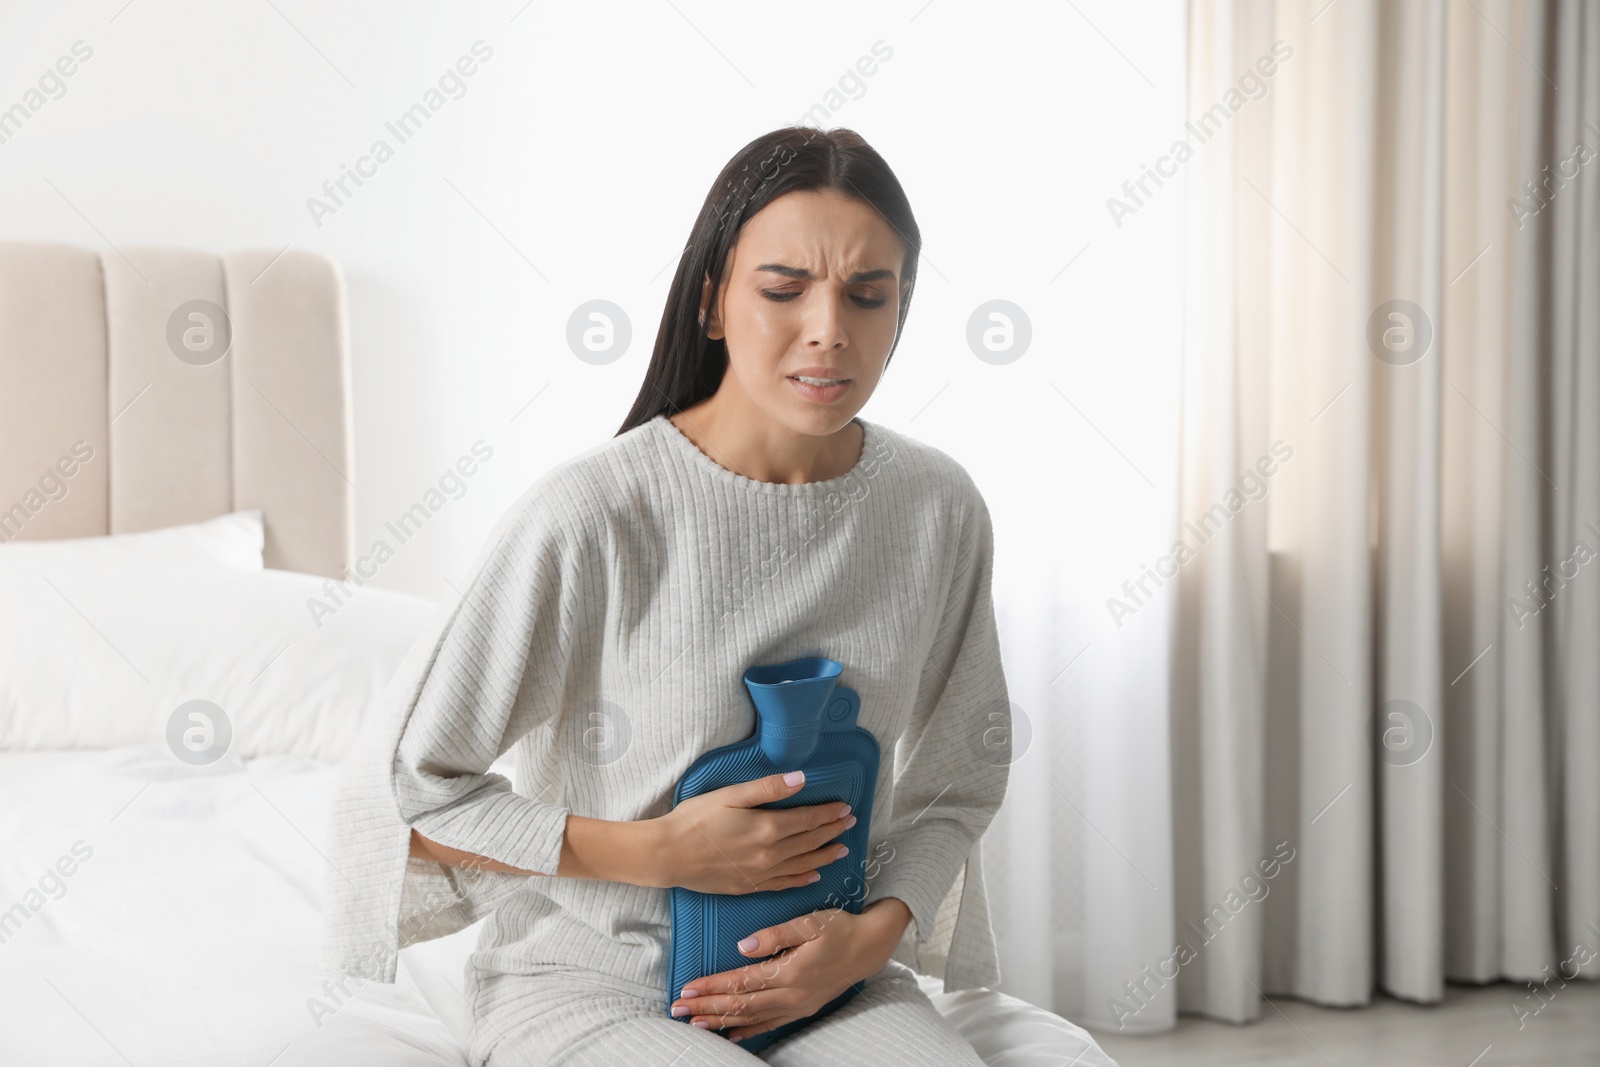 Photo of Woman using hot water bottle to relieve abdominal pain on bed at home